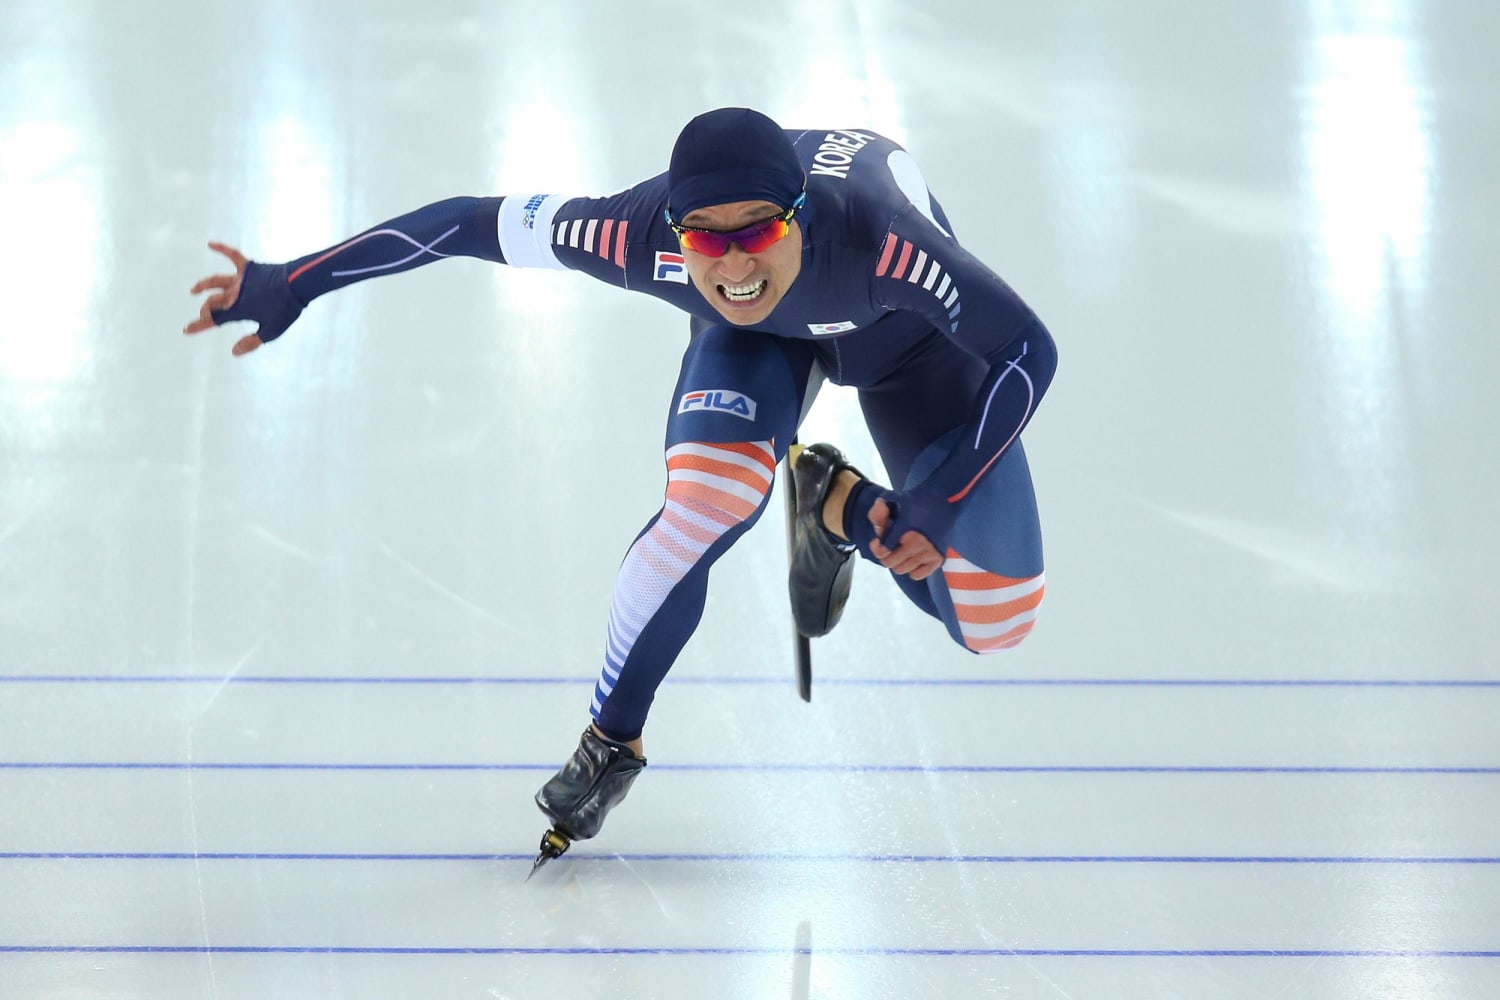 Icy Finish for South Korea Speed Skater